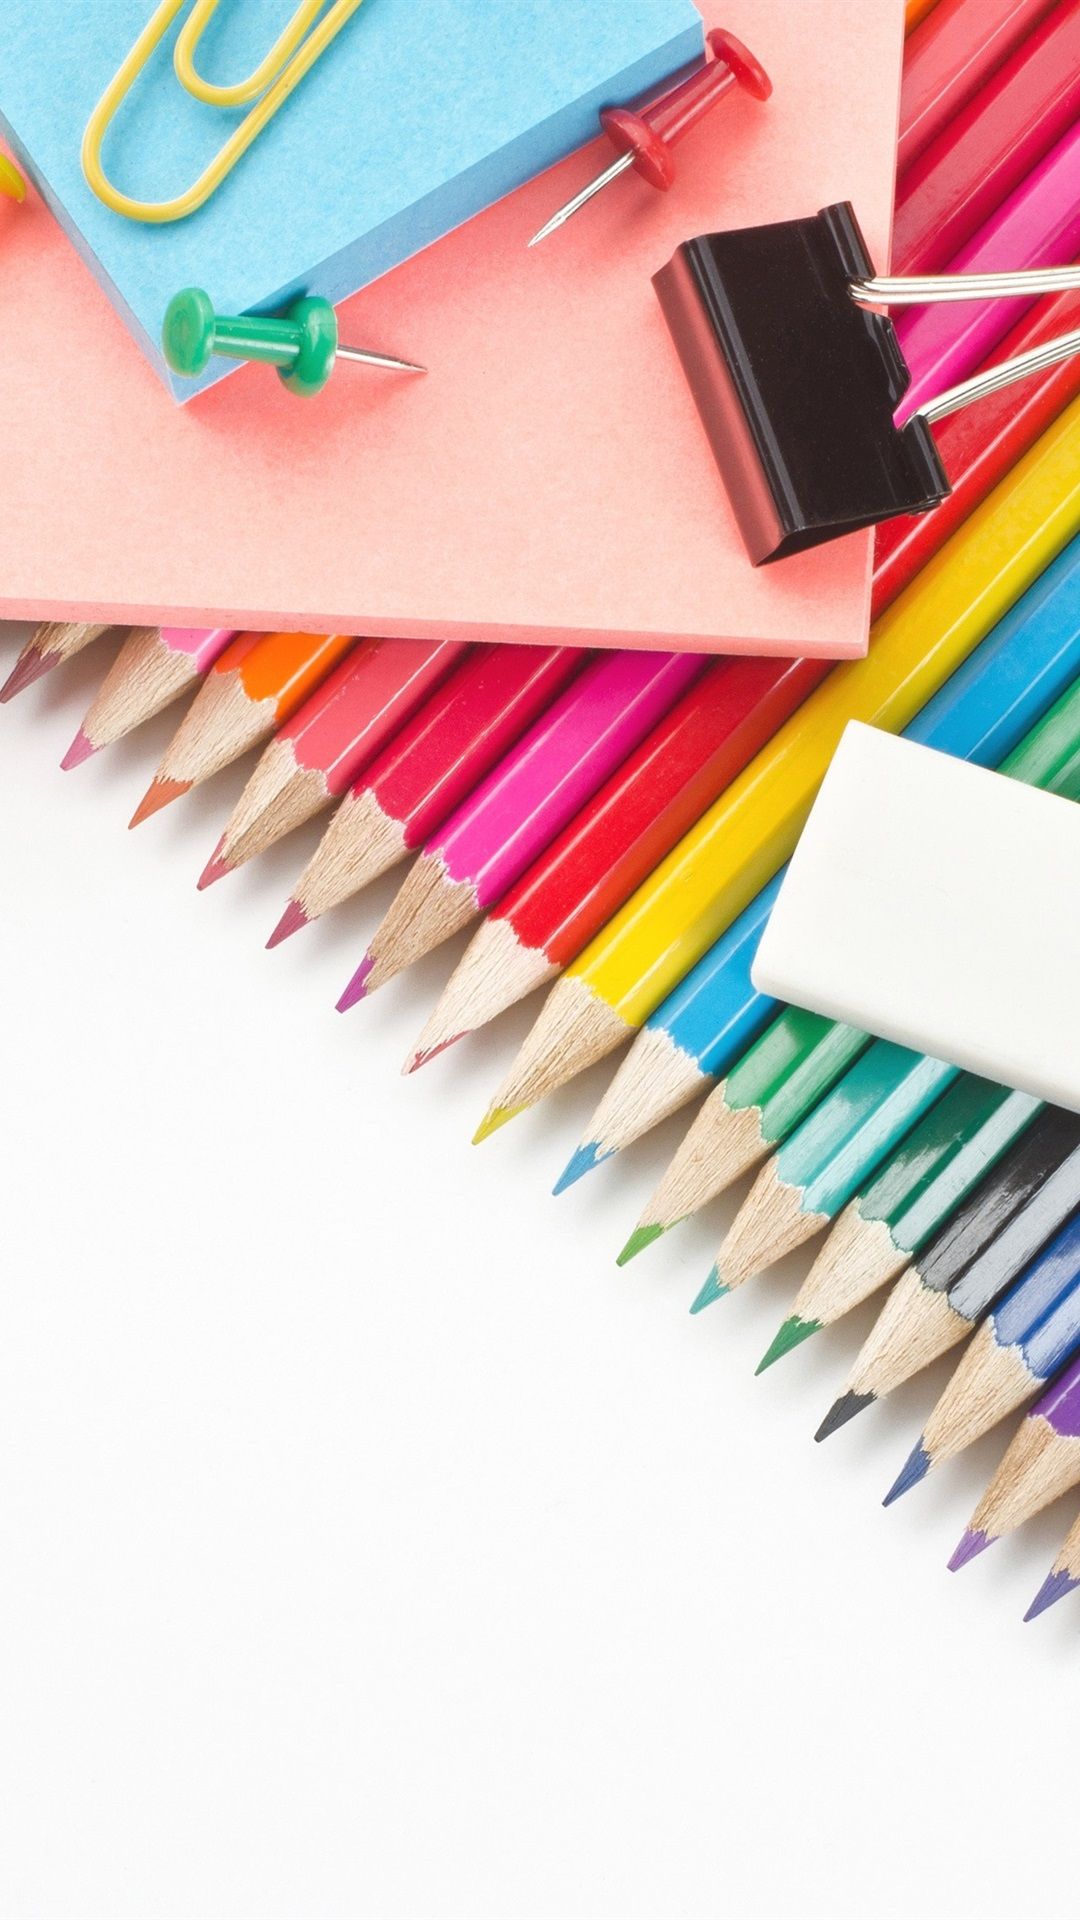 Wallpaper Colorful pencils, eraser, stationery 3840x2160 UHD 4K Picture, Image